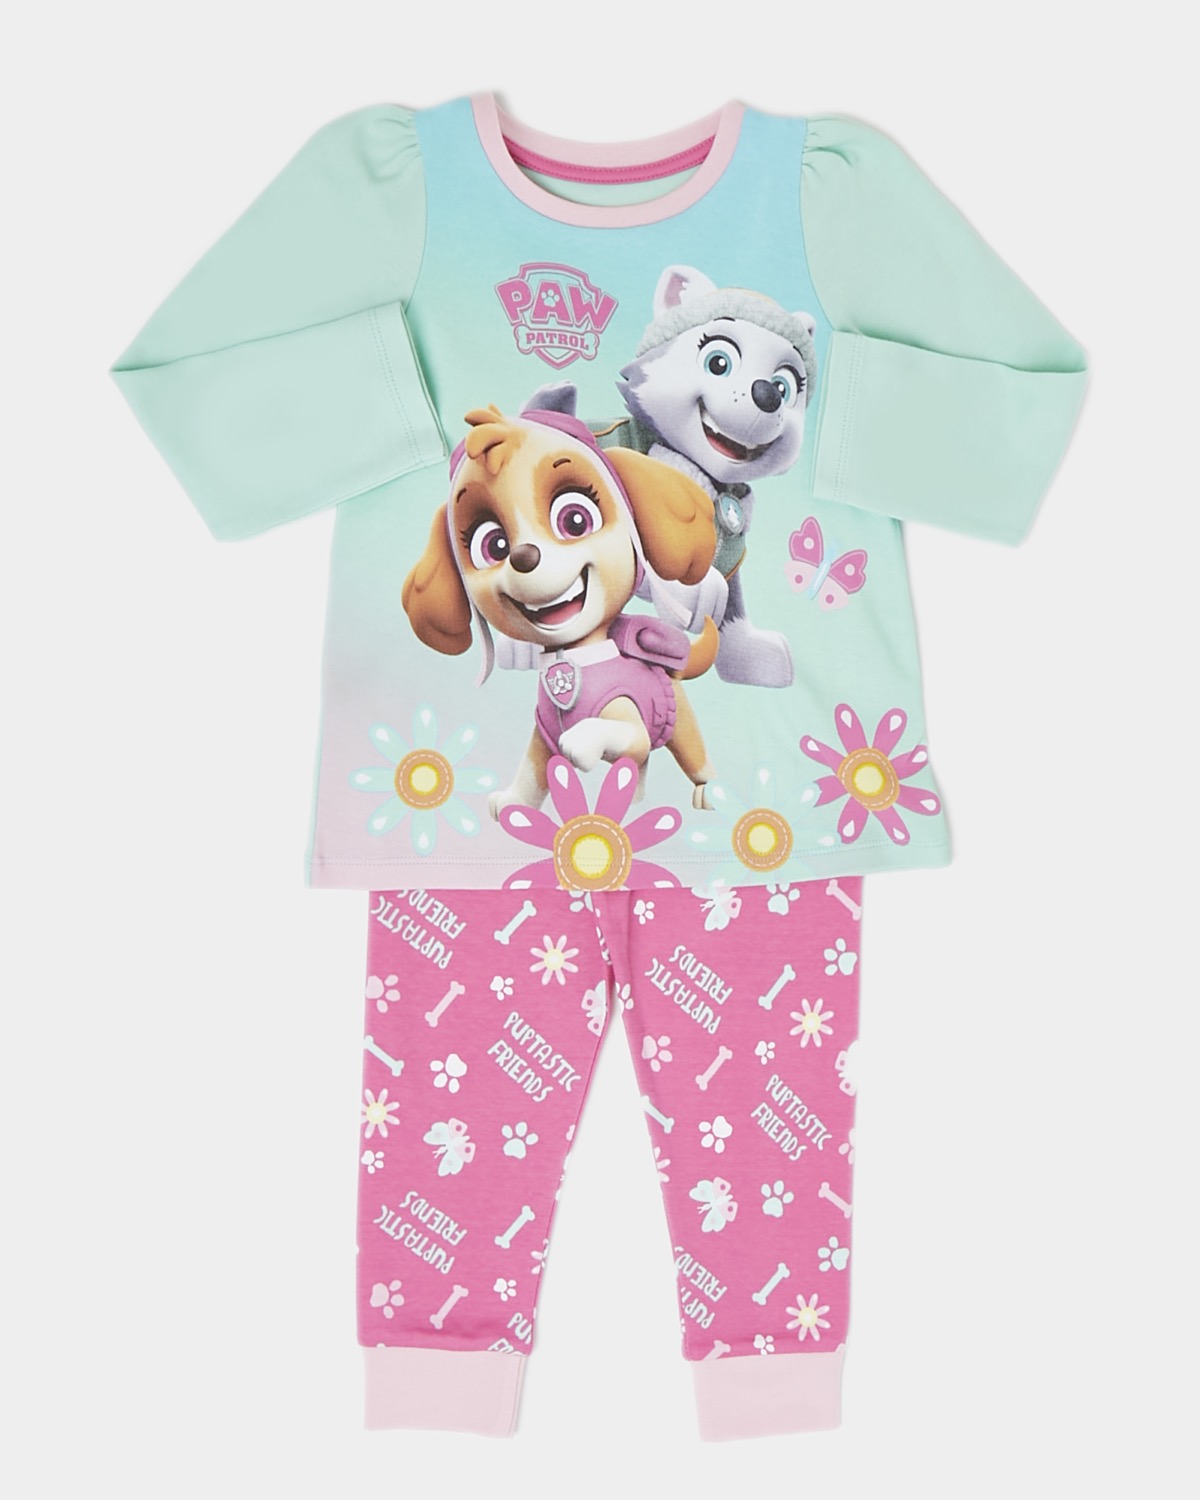 5 years with a name in pink Personalised Paw Patrol pyjamas age 18 months 